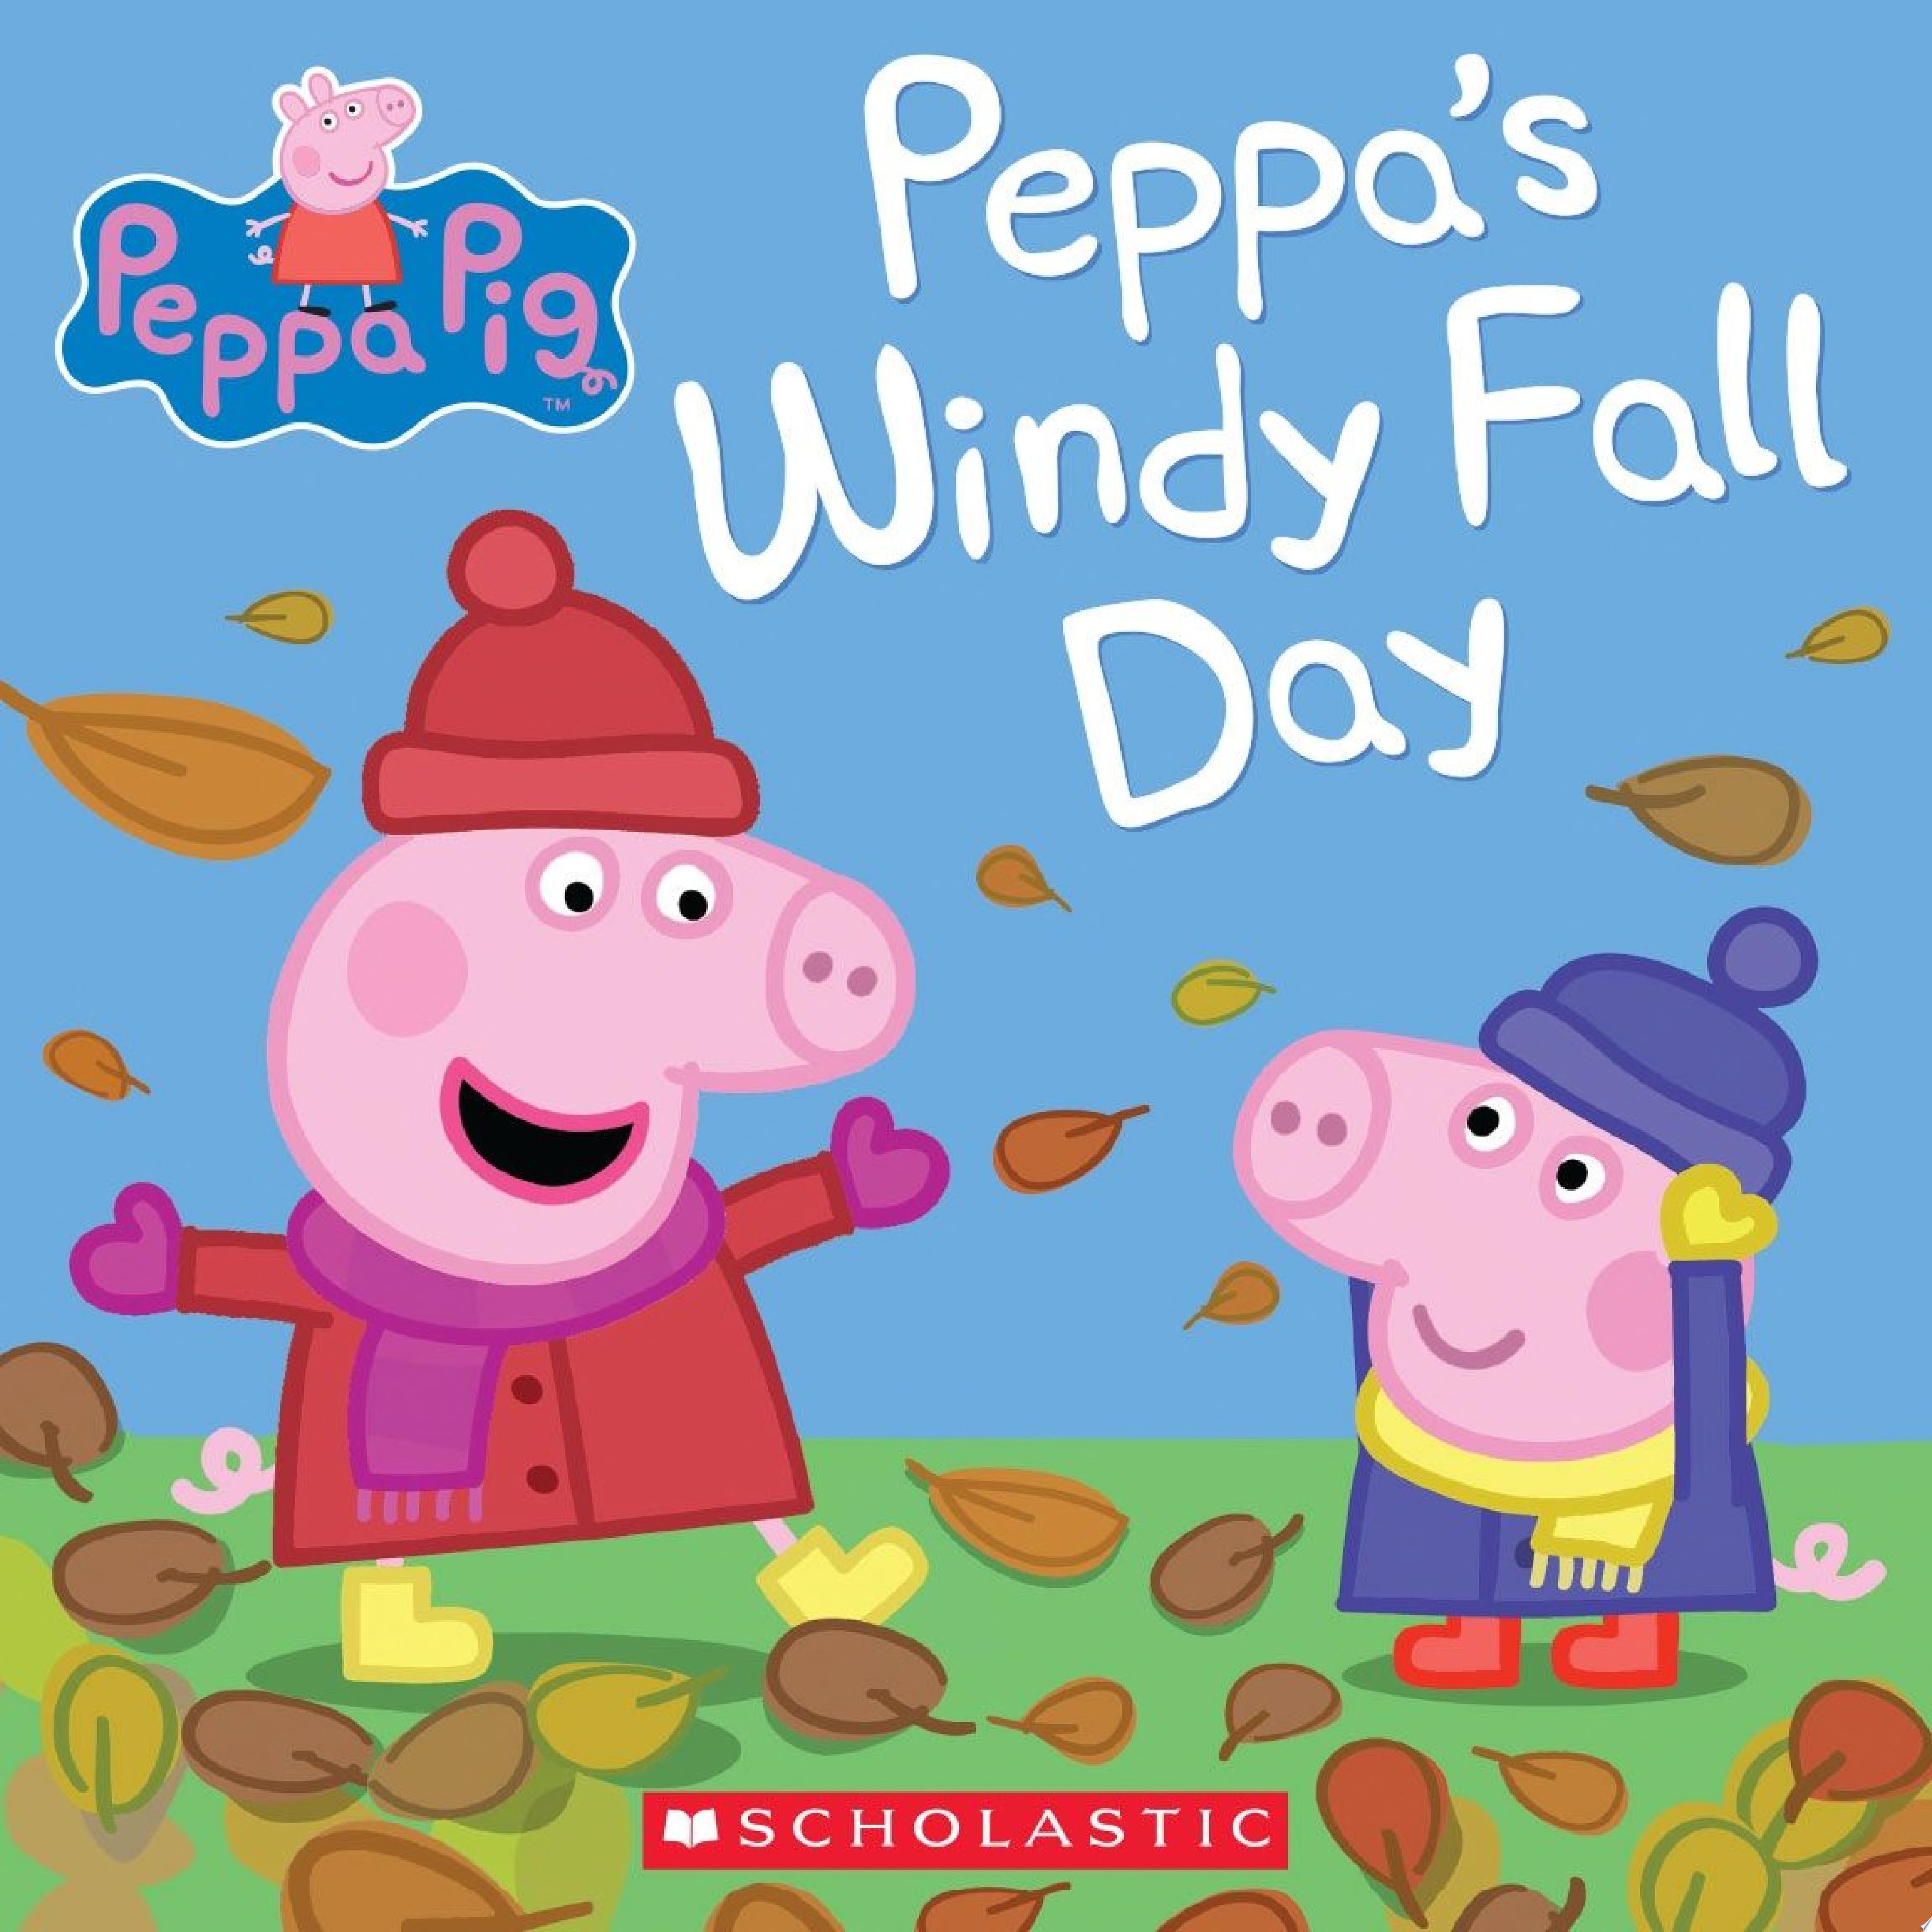 Image for "Peppa&#039;s Windy Fall Day (Peppa Pig)"